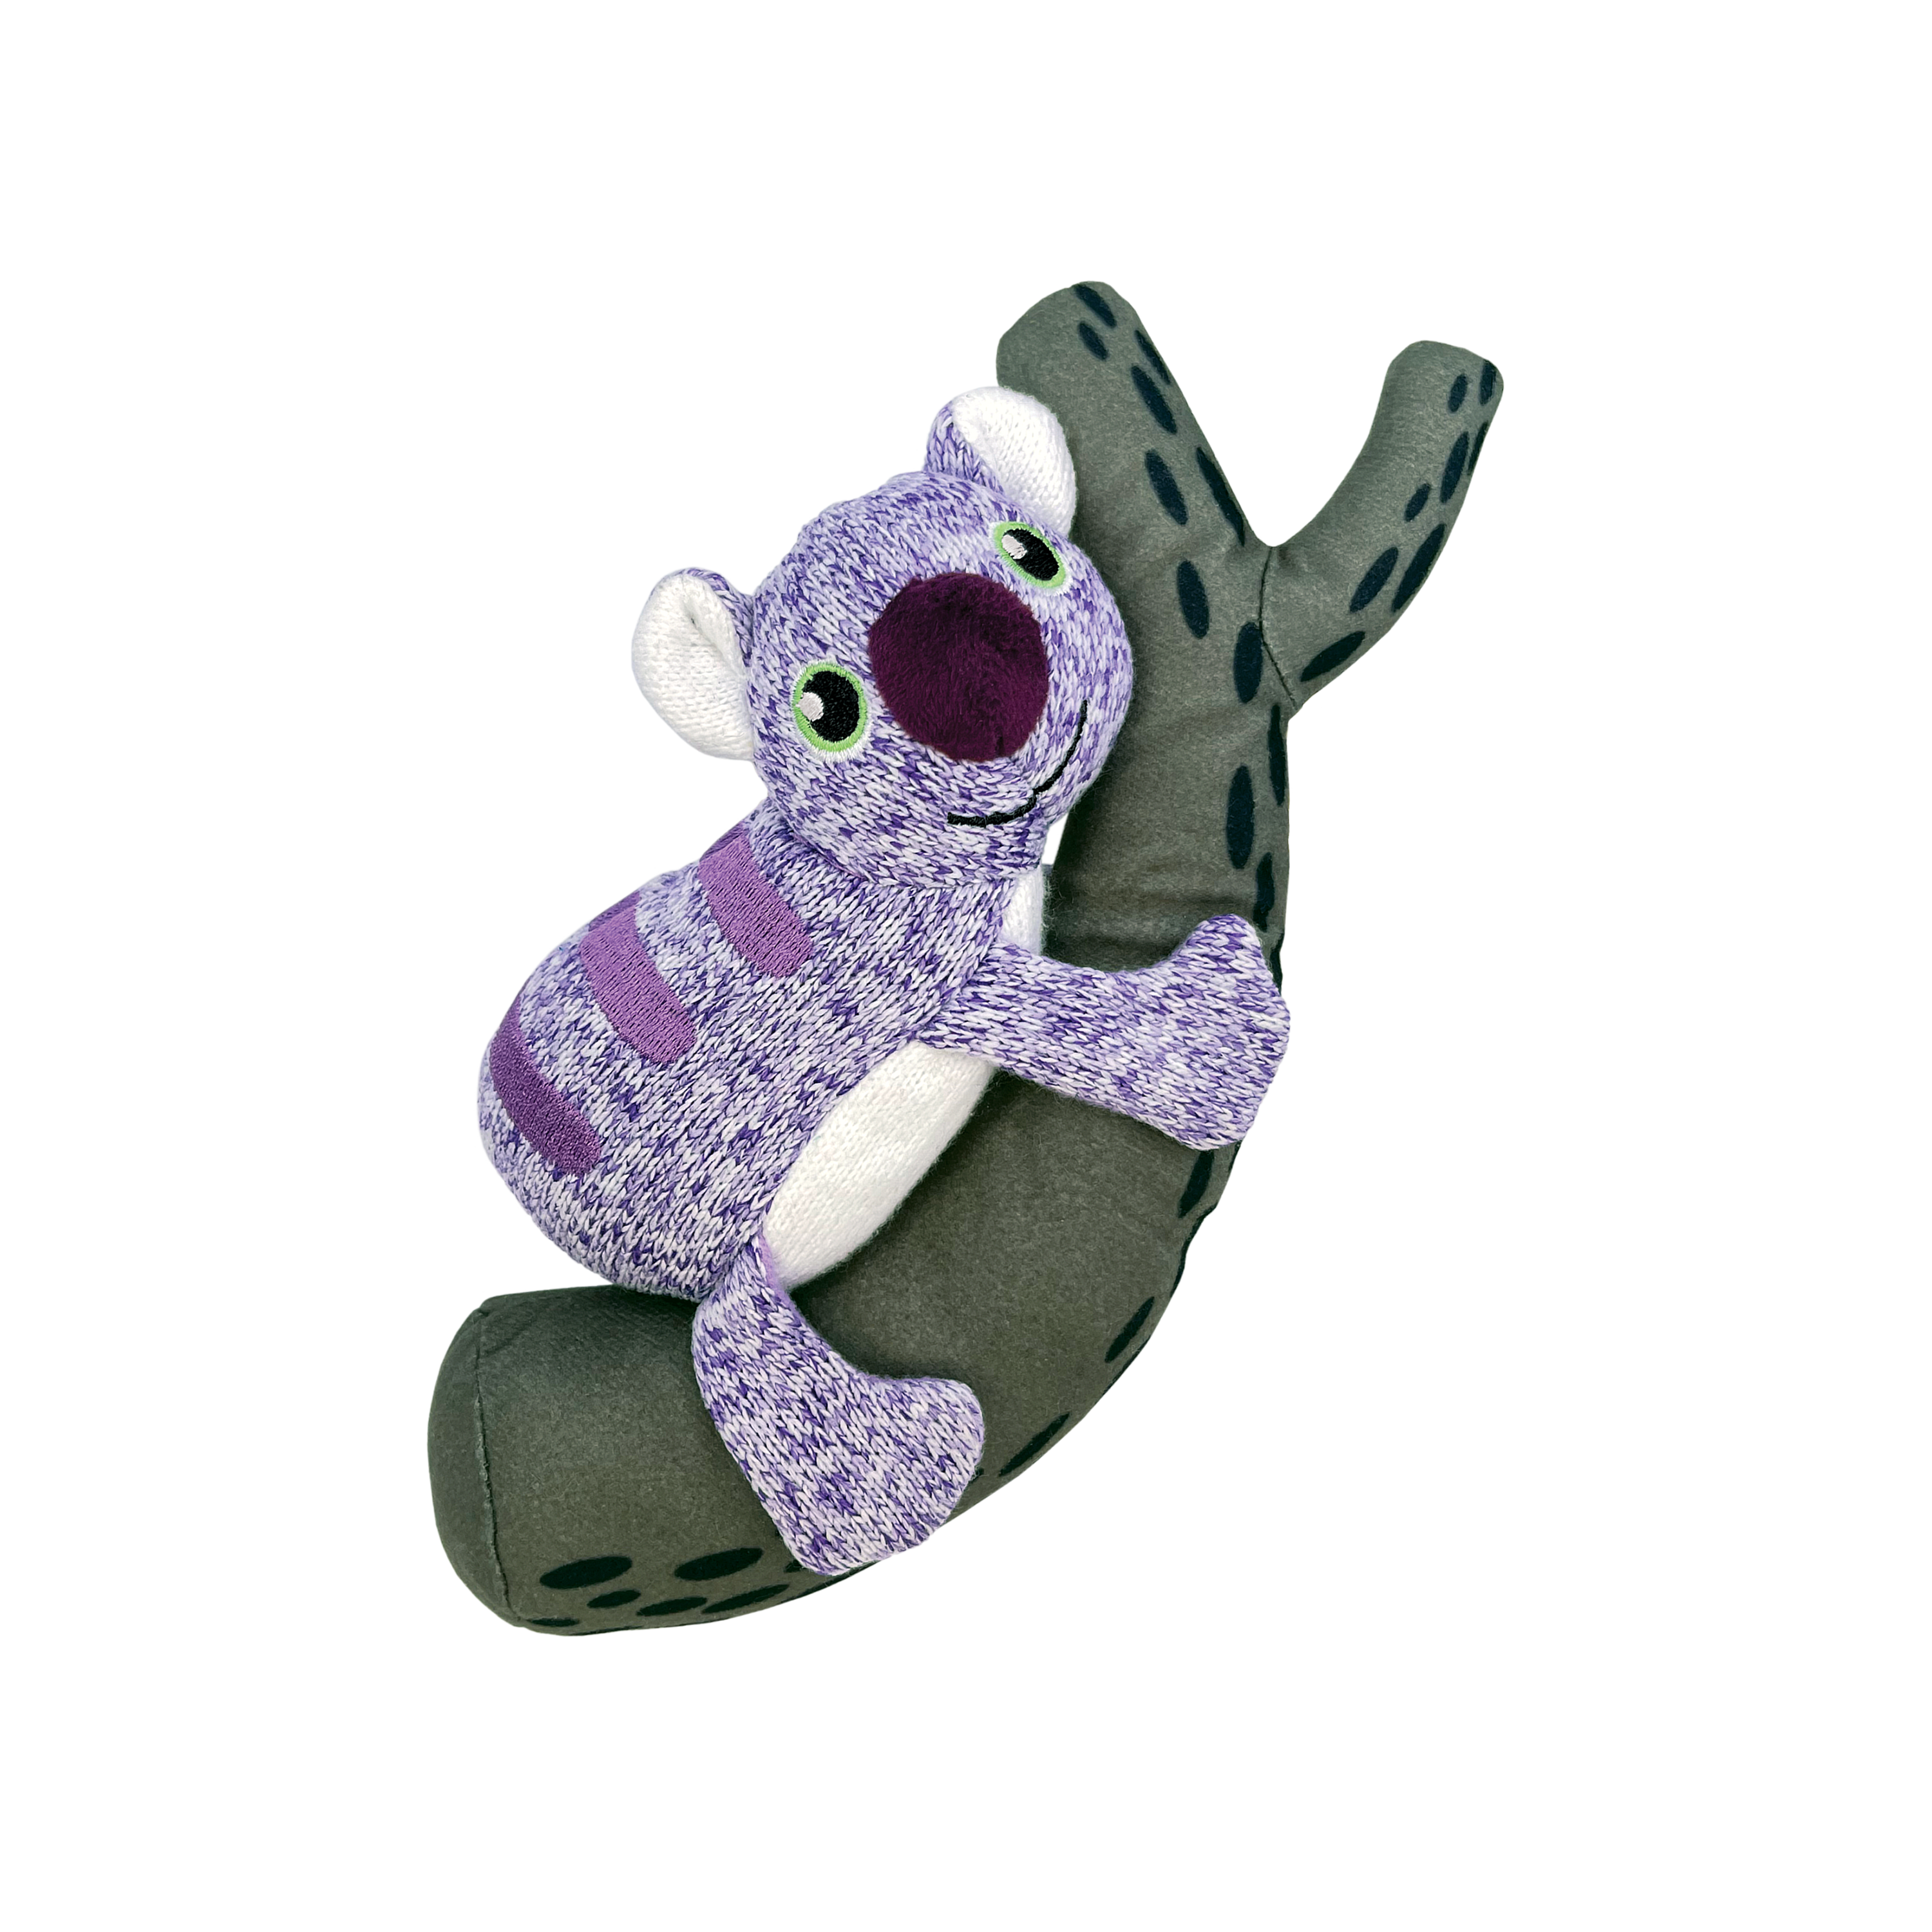 Pull-A-Partz Pals Koala offpack product image